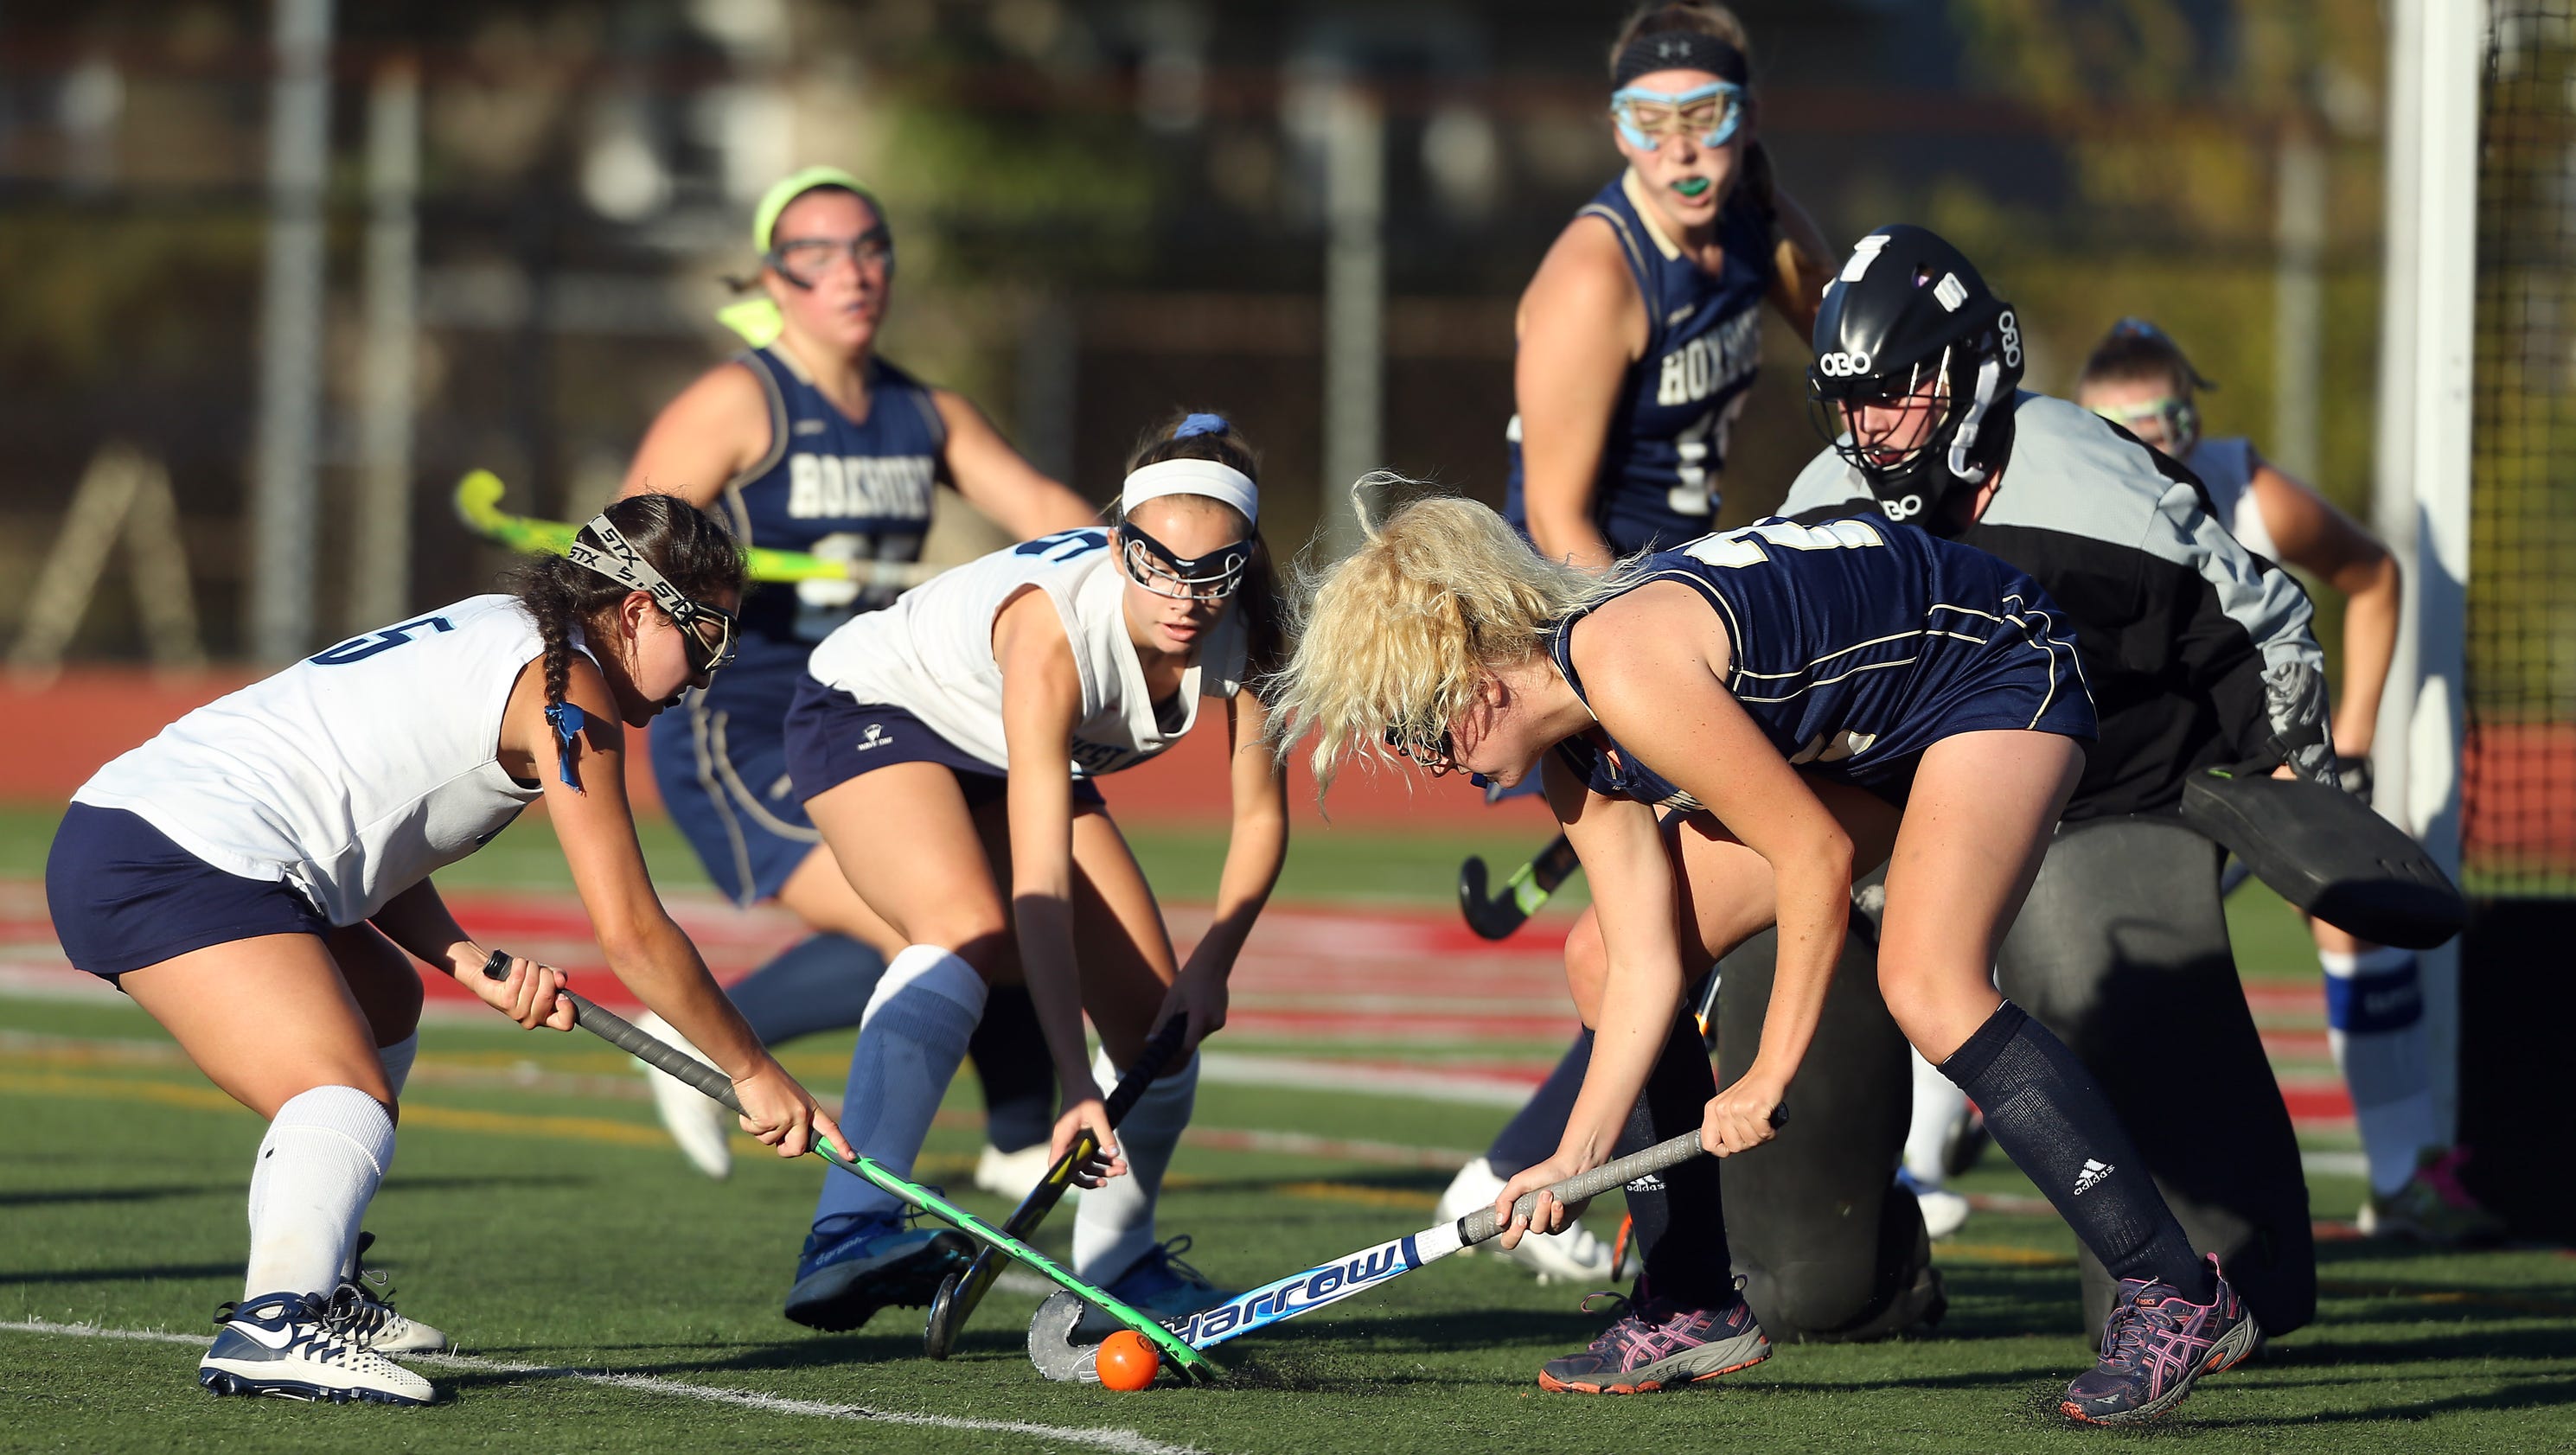 West Morris field hockey moves on in MCT - Daily Record - Daily Record